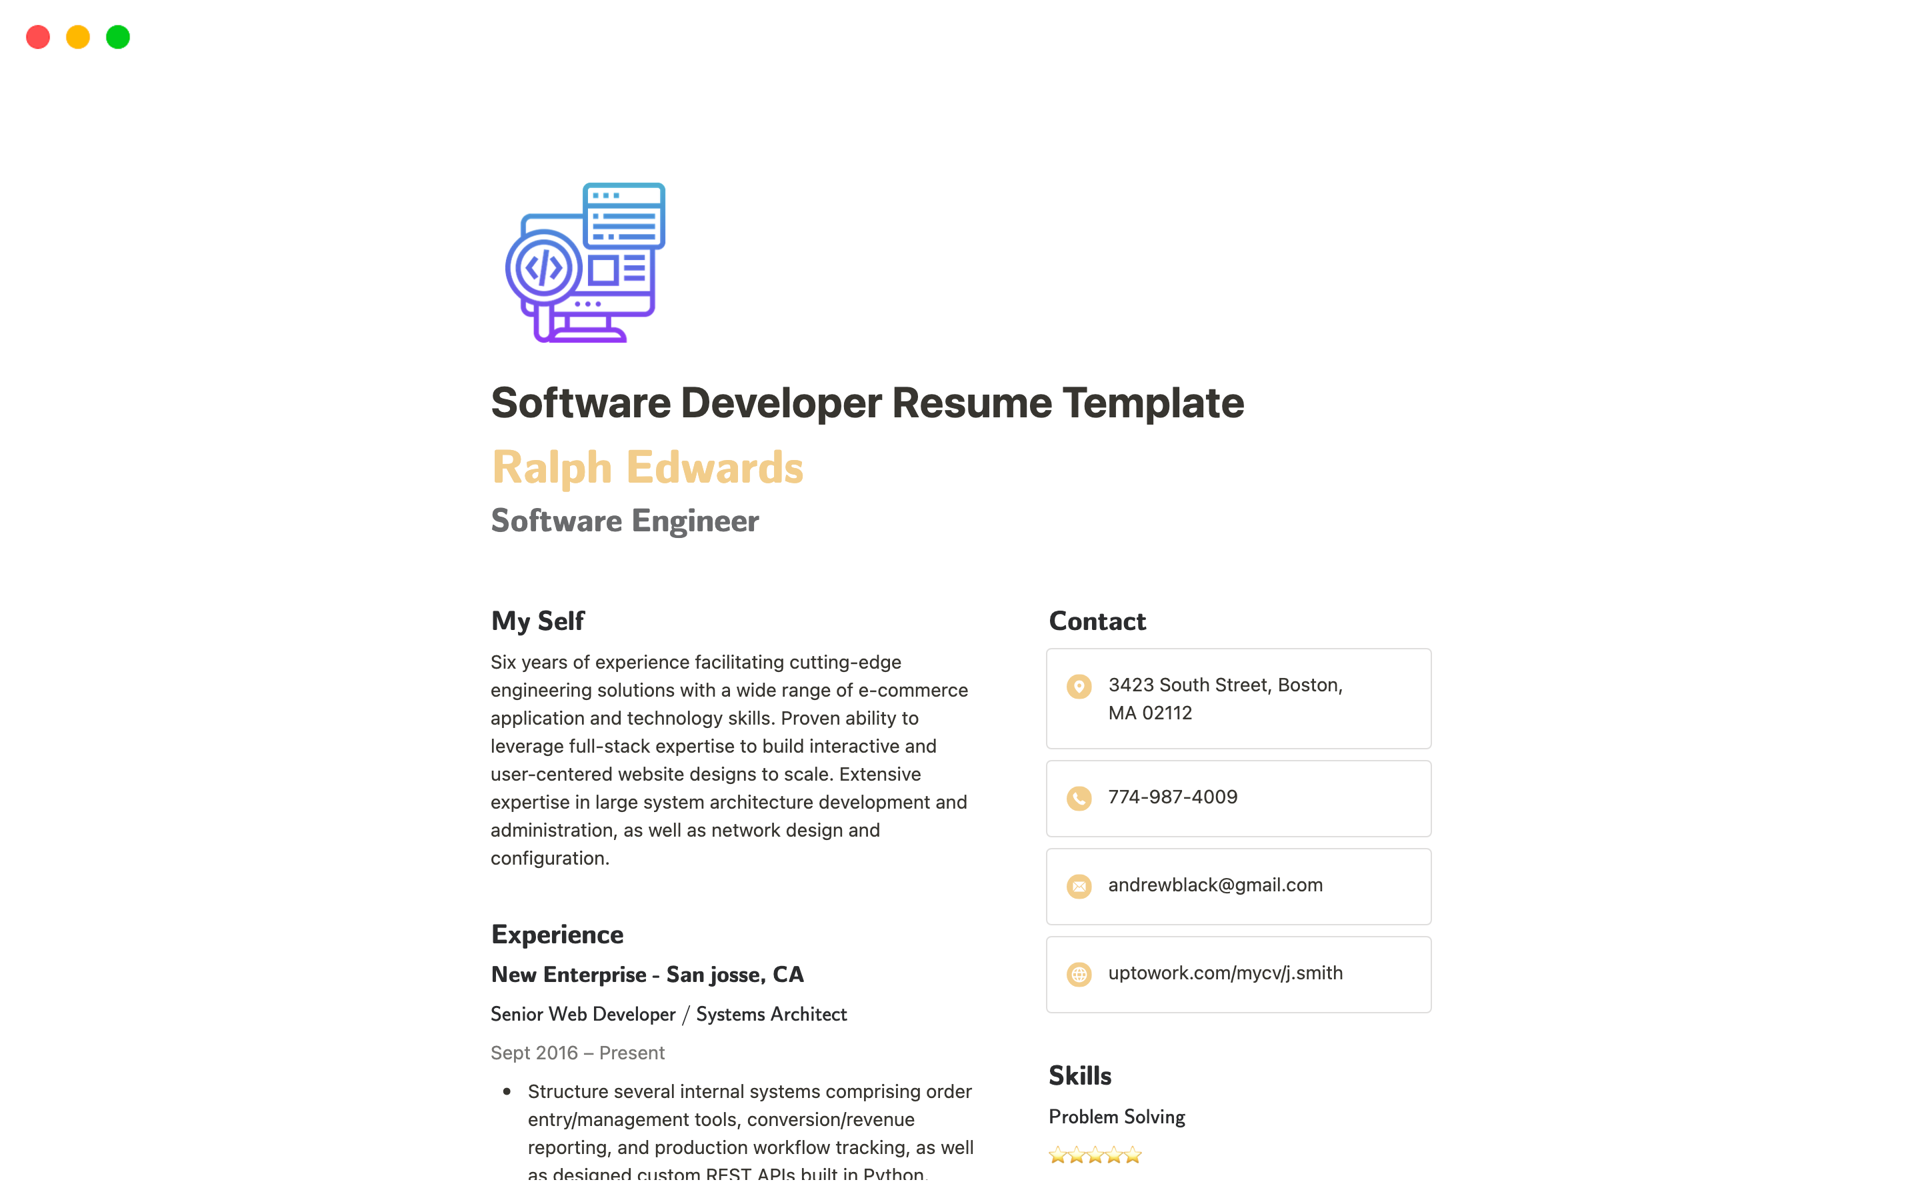 A template preview for Software Developer Resume